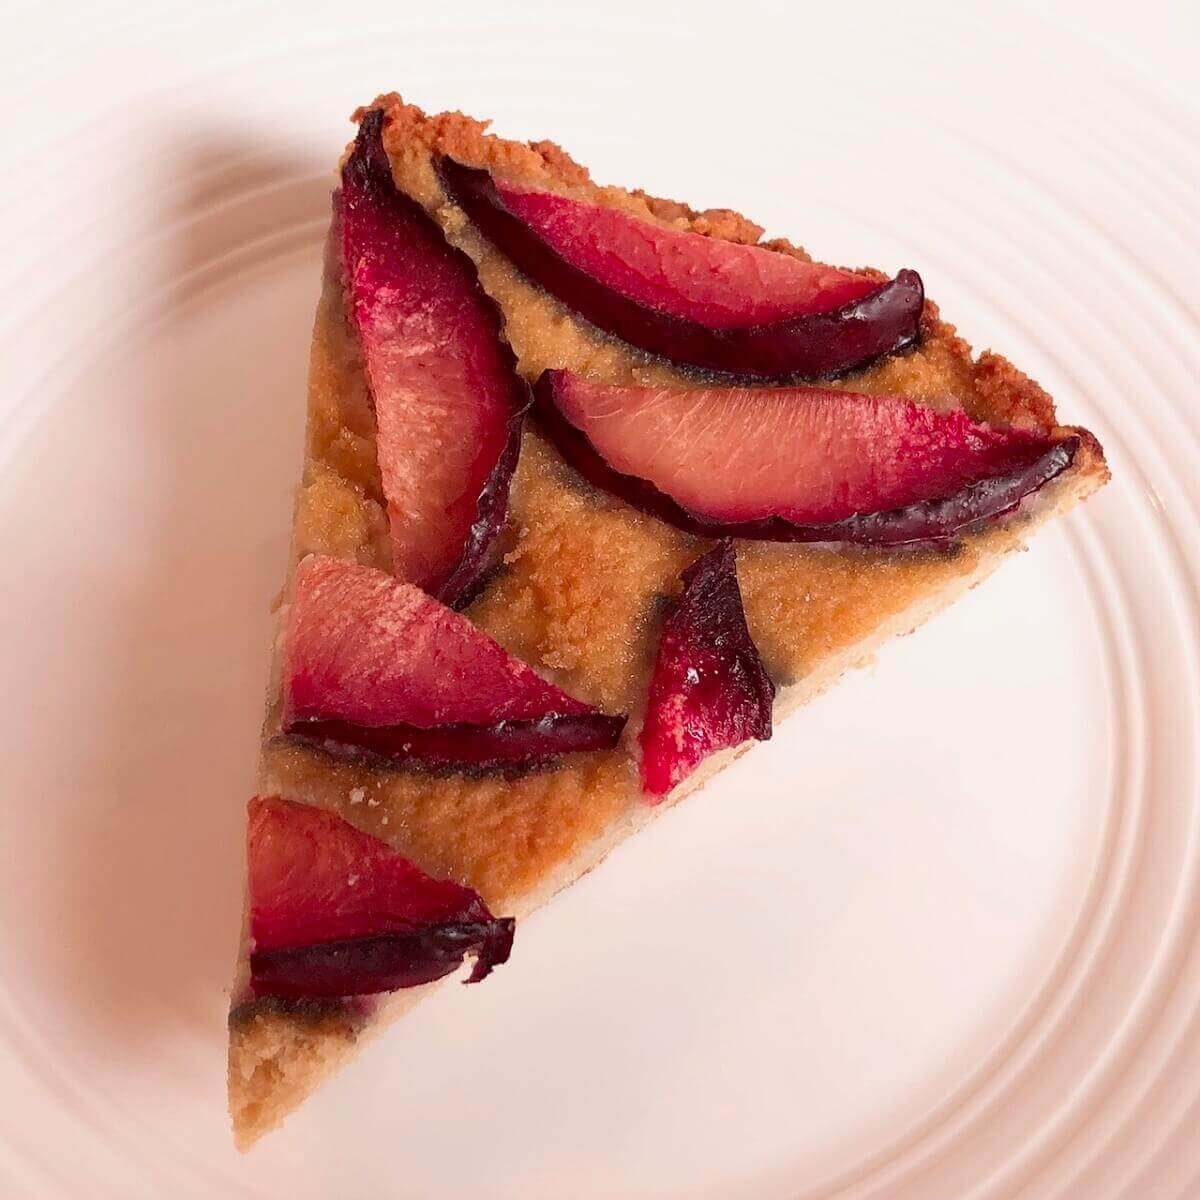 A piece of gluten-free plum cake with sliced plums on top.